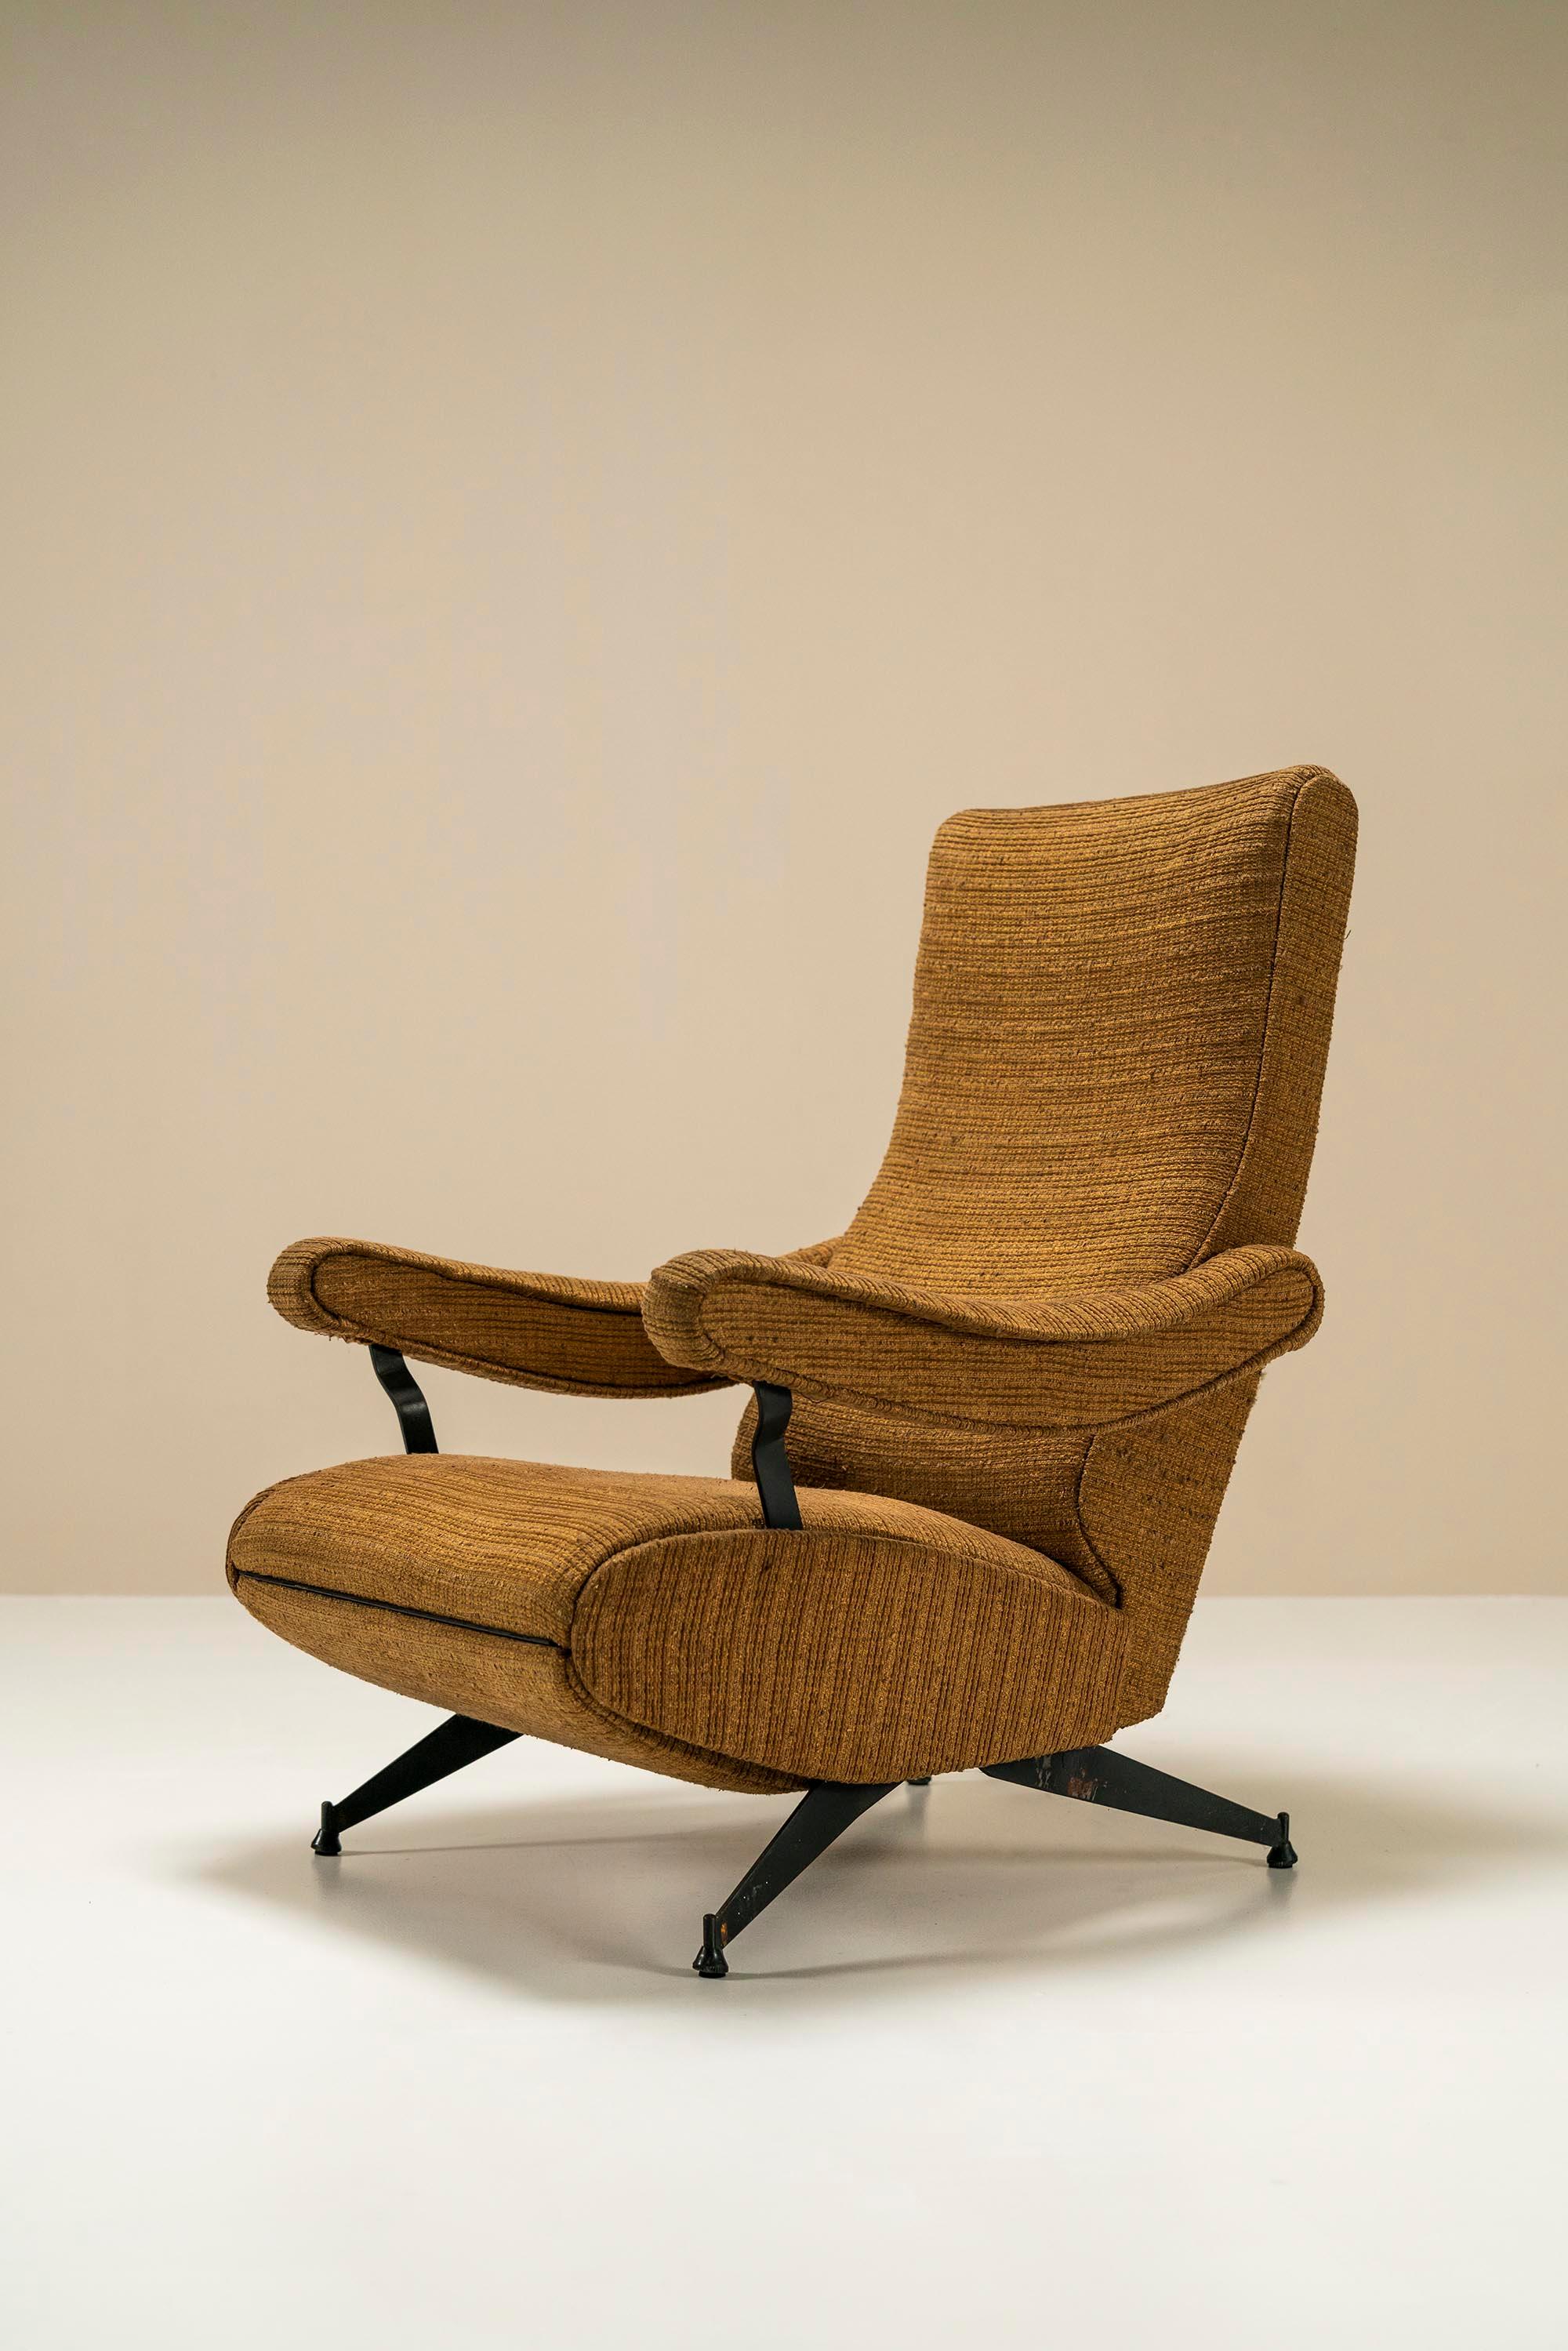 Reclining Armchair in Steel and Fabric by Nello Pini for Novarredo, Italy, 1959 For Sale 7